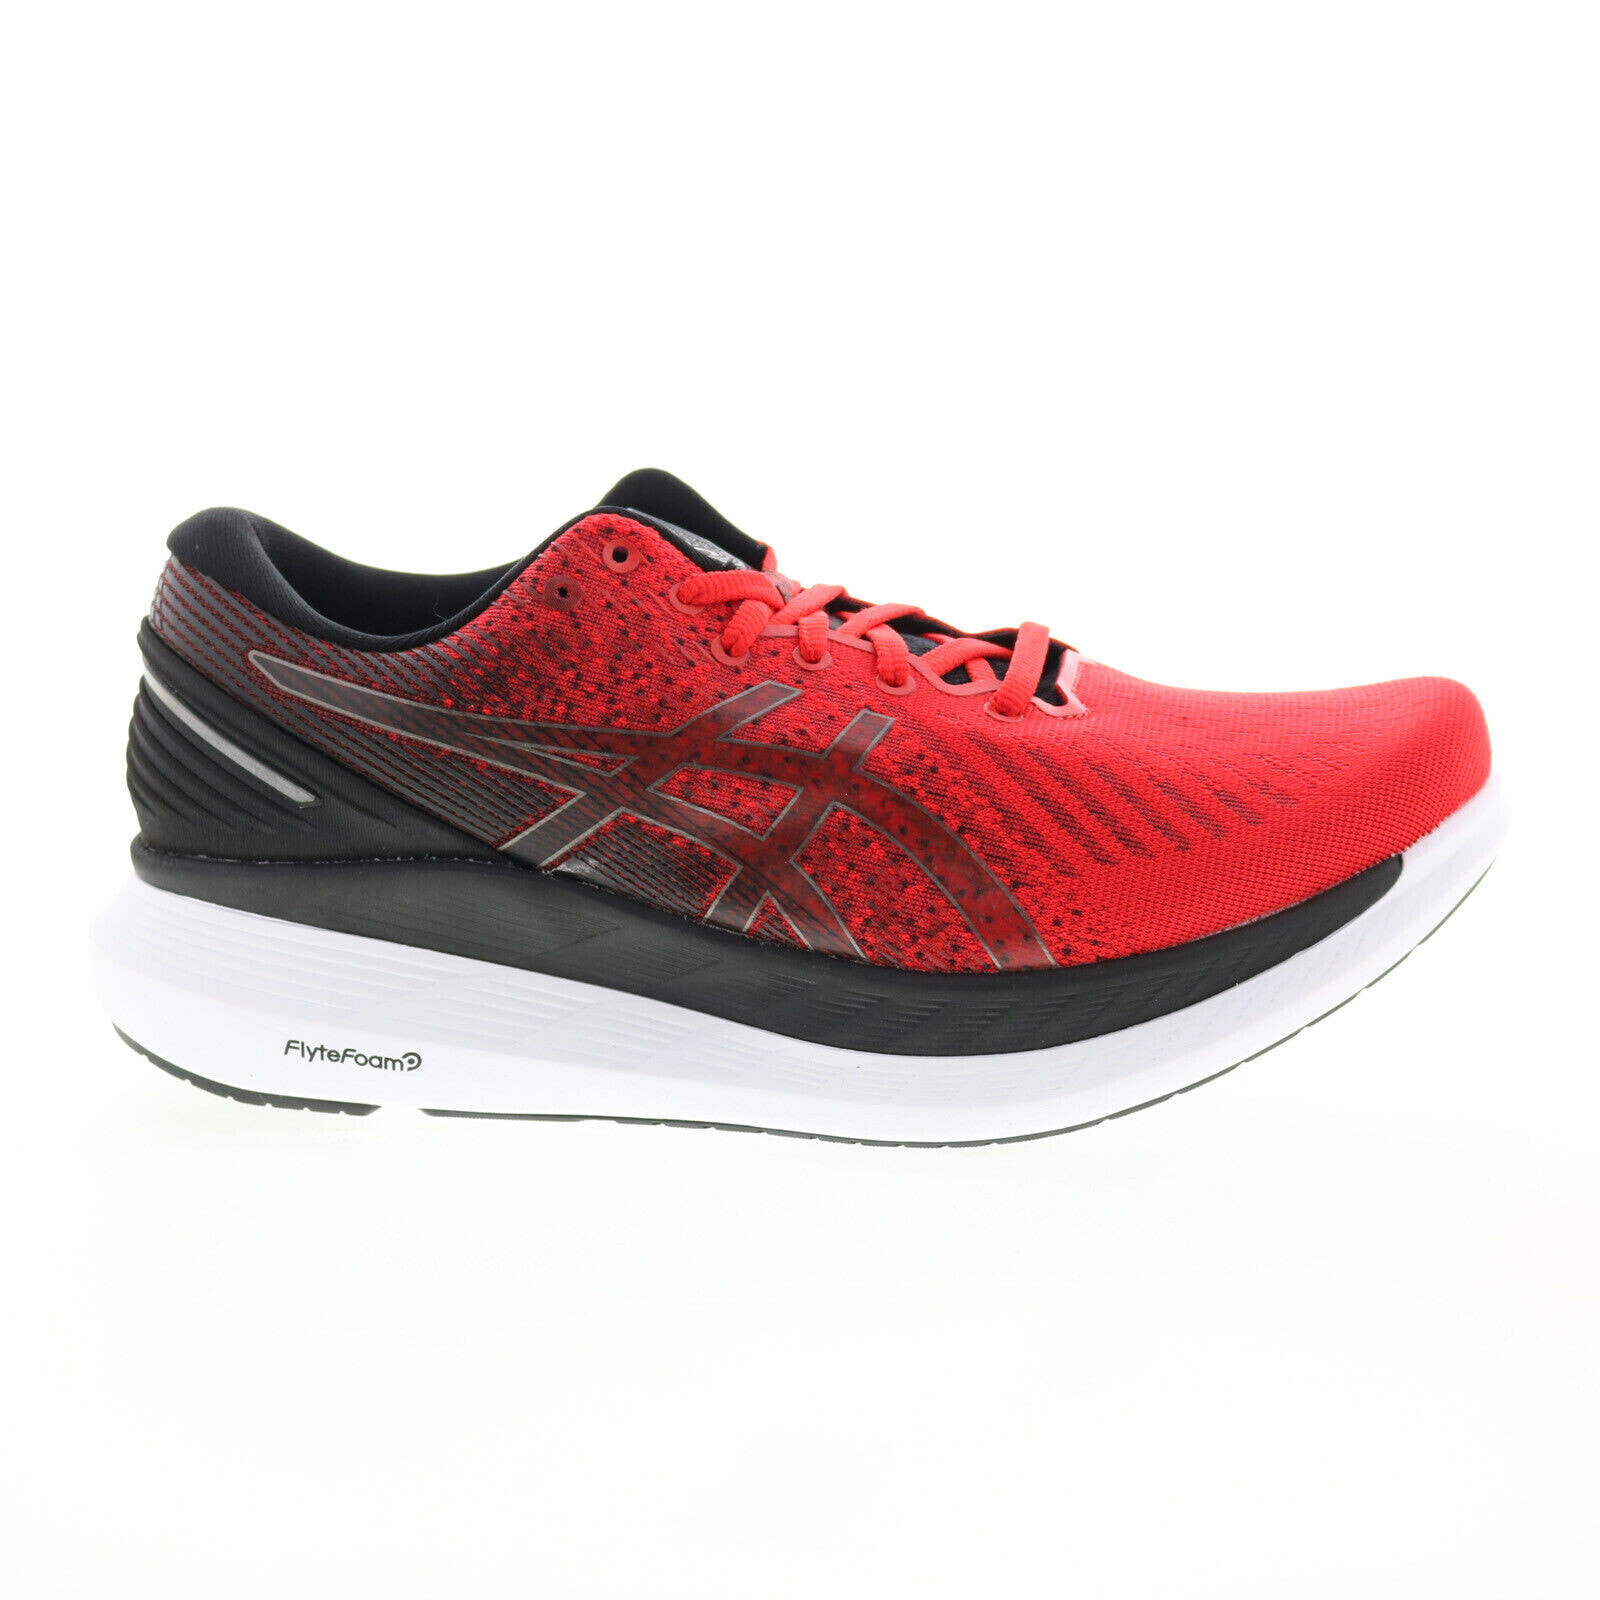 Asics GildeRide 1011B237-608 Mens Red Leather Wide Athletic Running Shoes 8.5